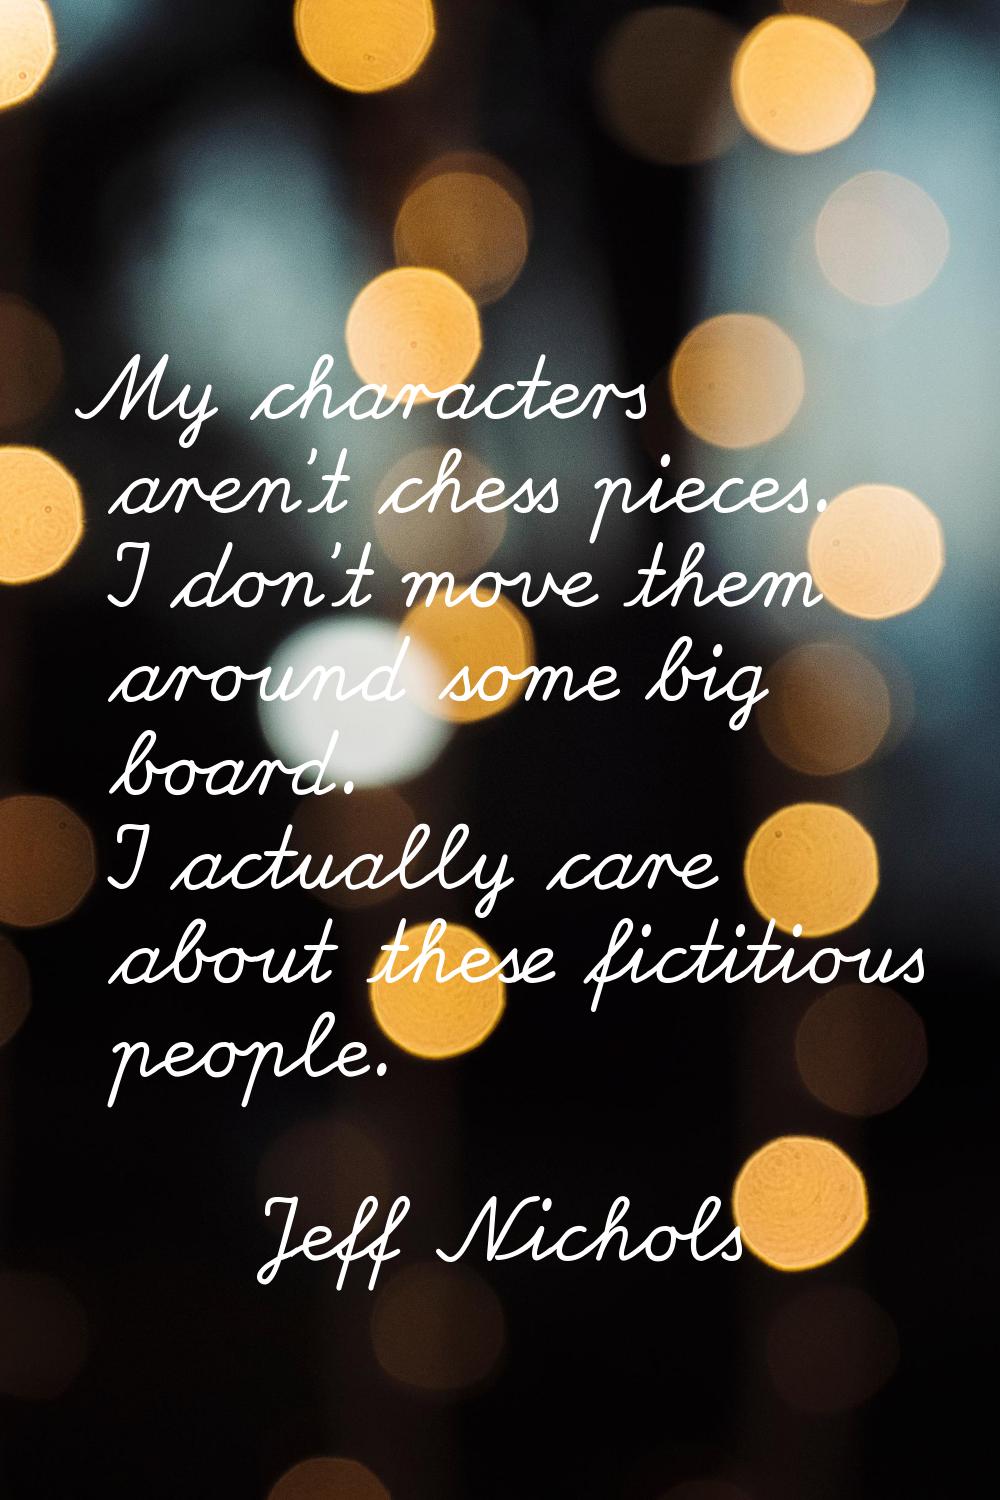 My characters aren't chess pieces. I don't move them around some big board. I actually care about t